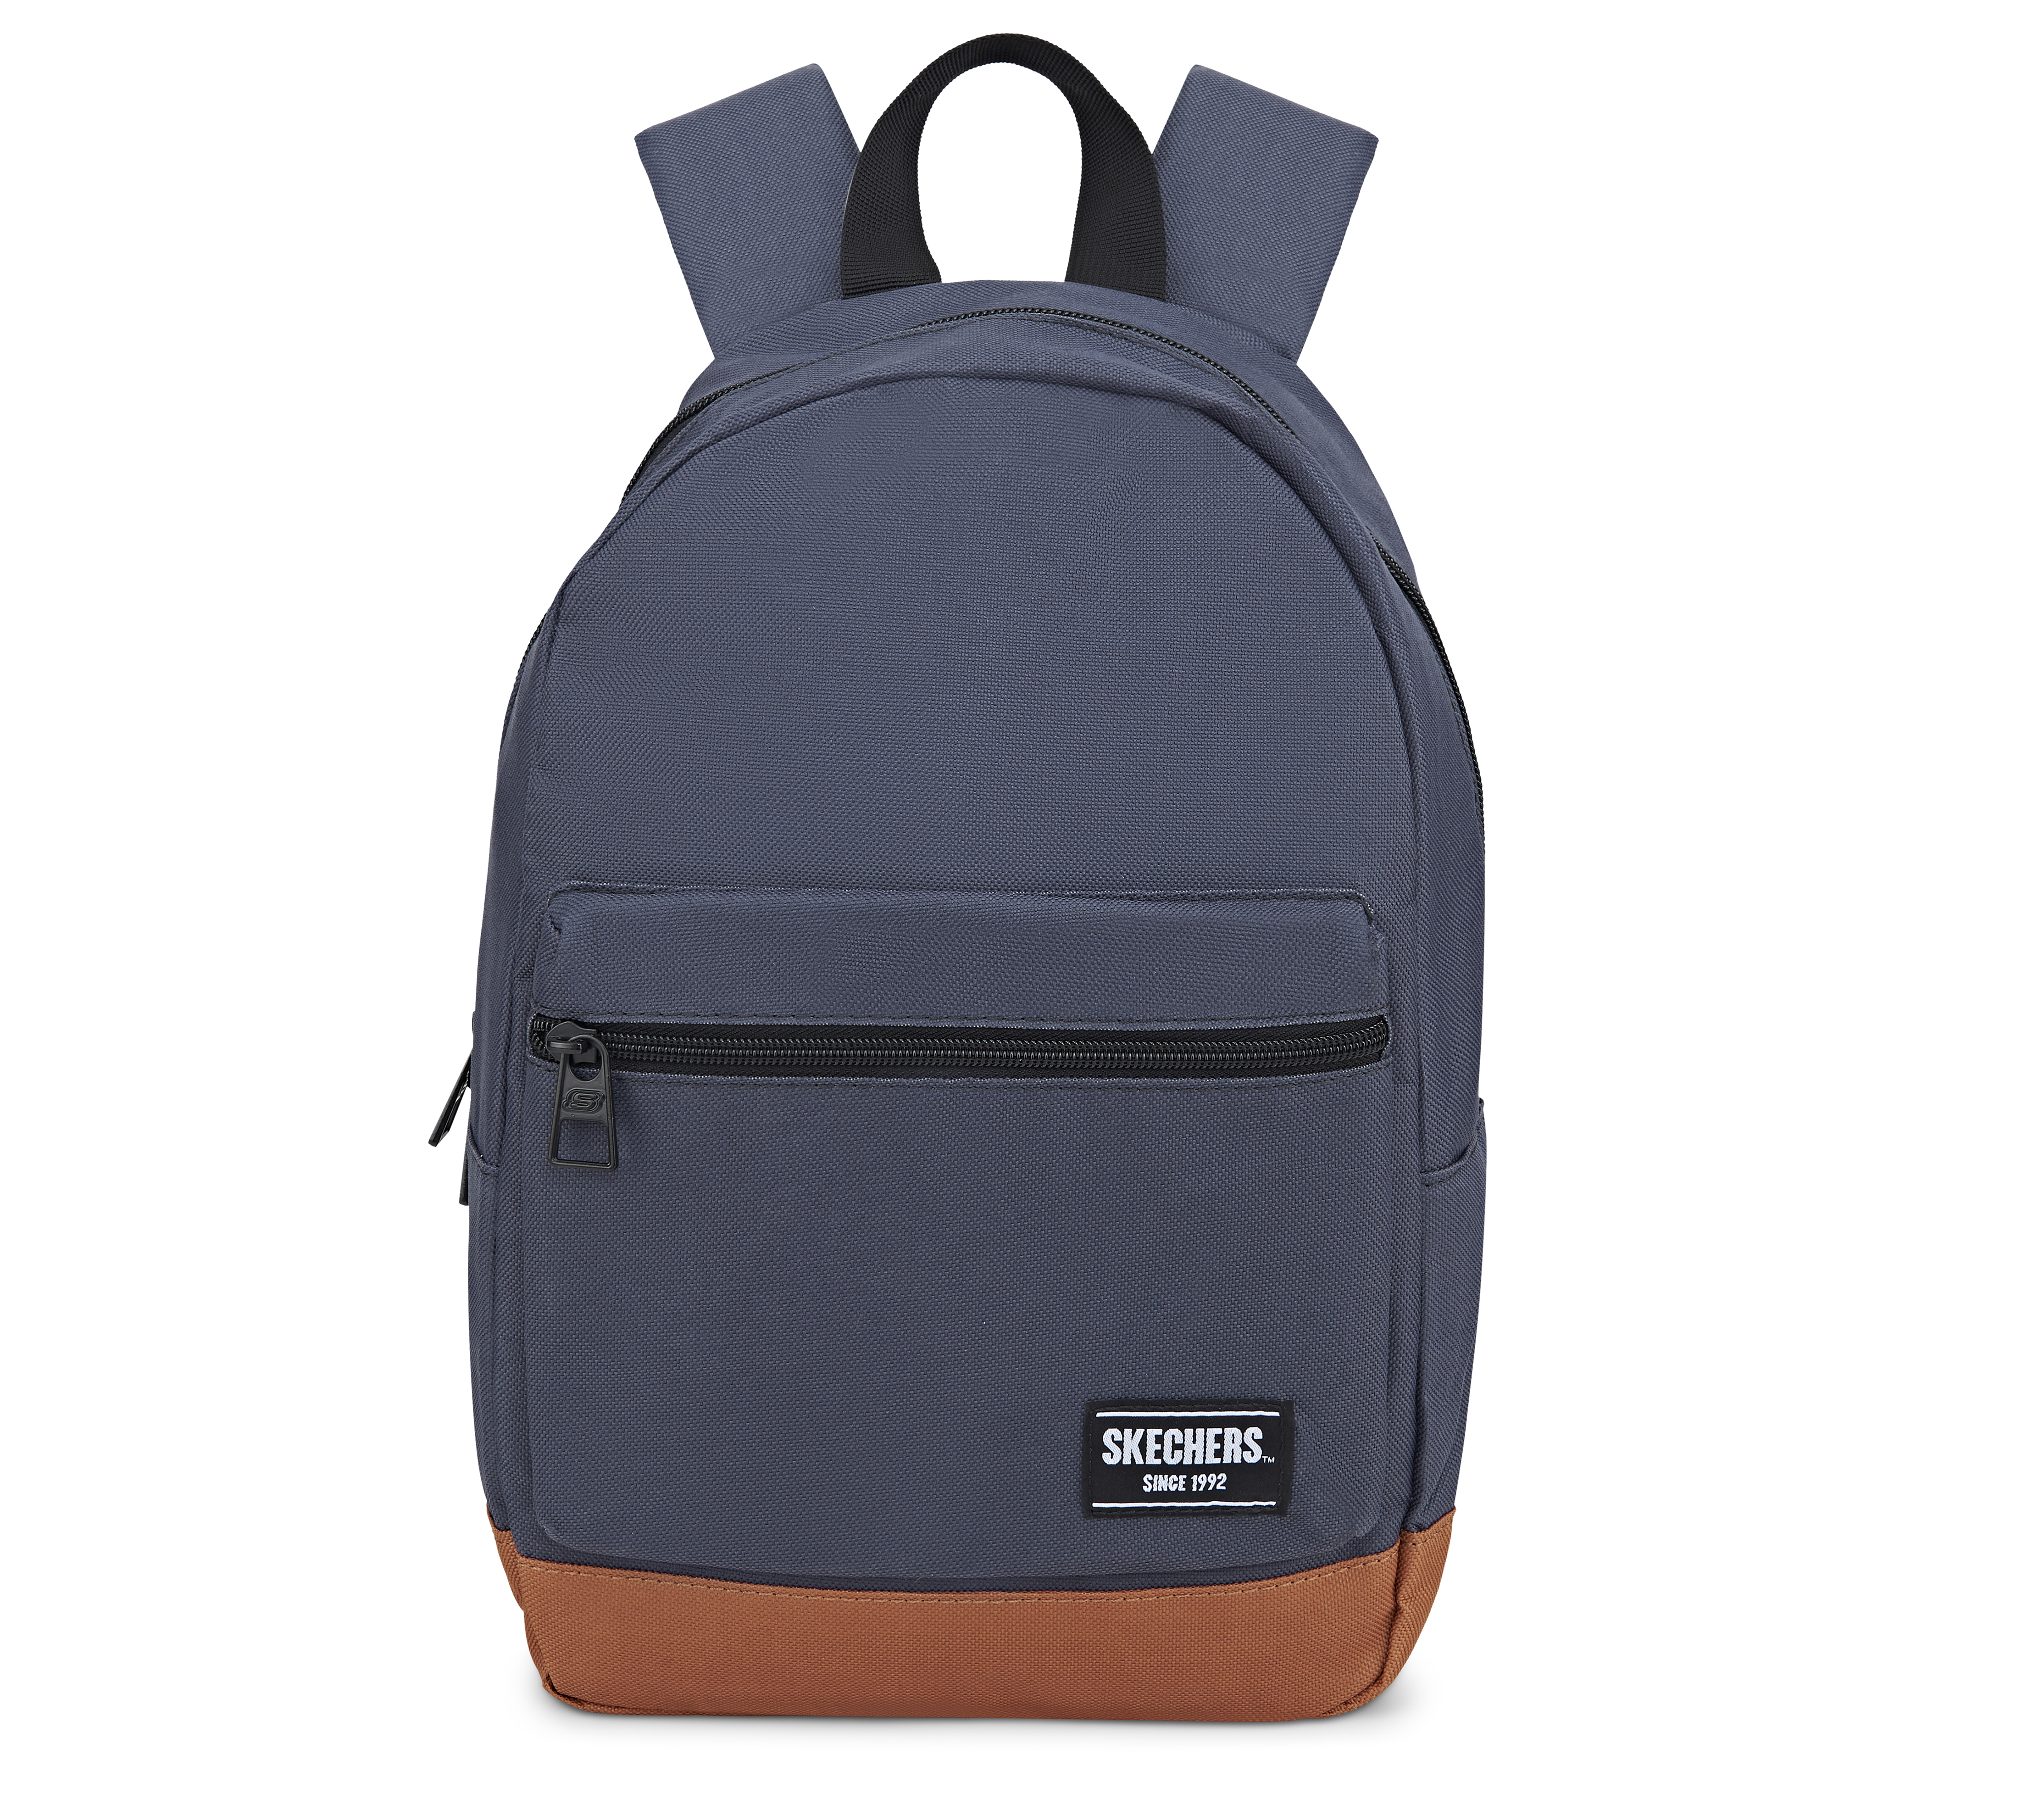 BACKPACK, GREY Accessories Lateral View